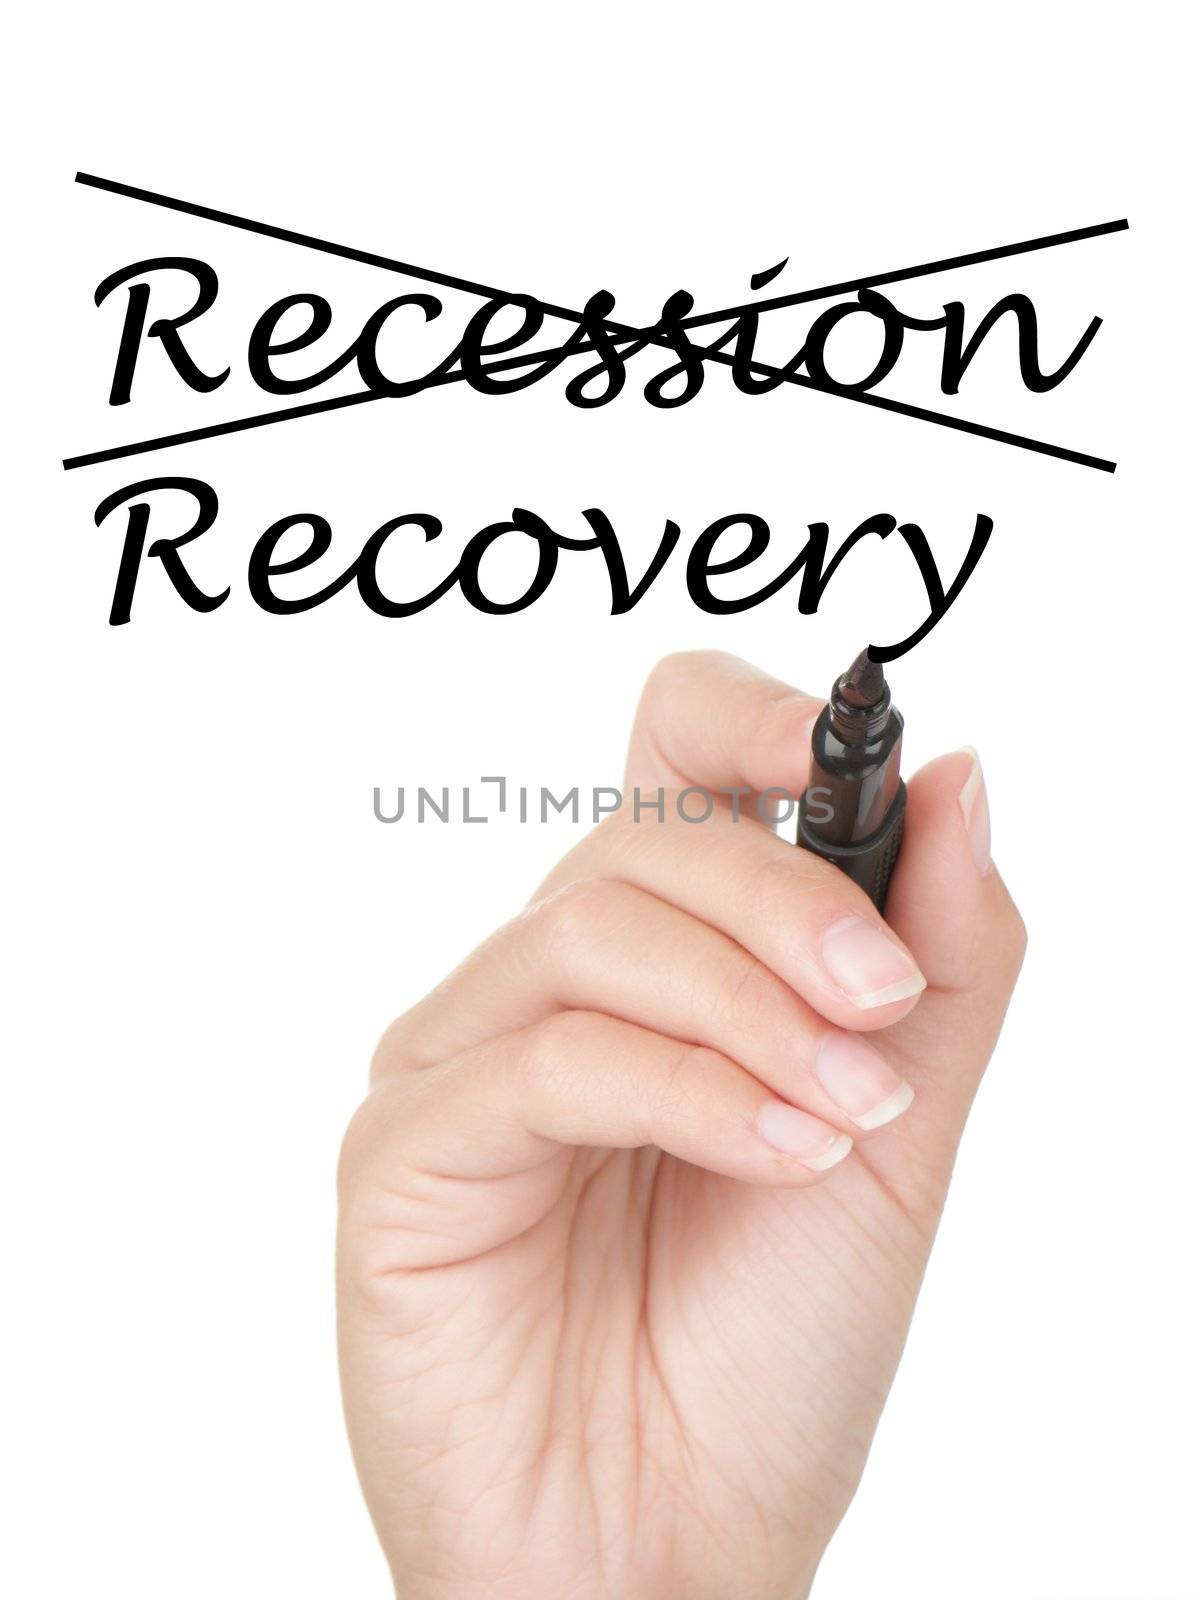 Recession and recovery concept by Maridav